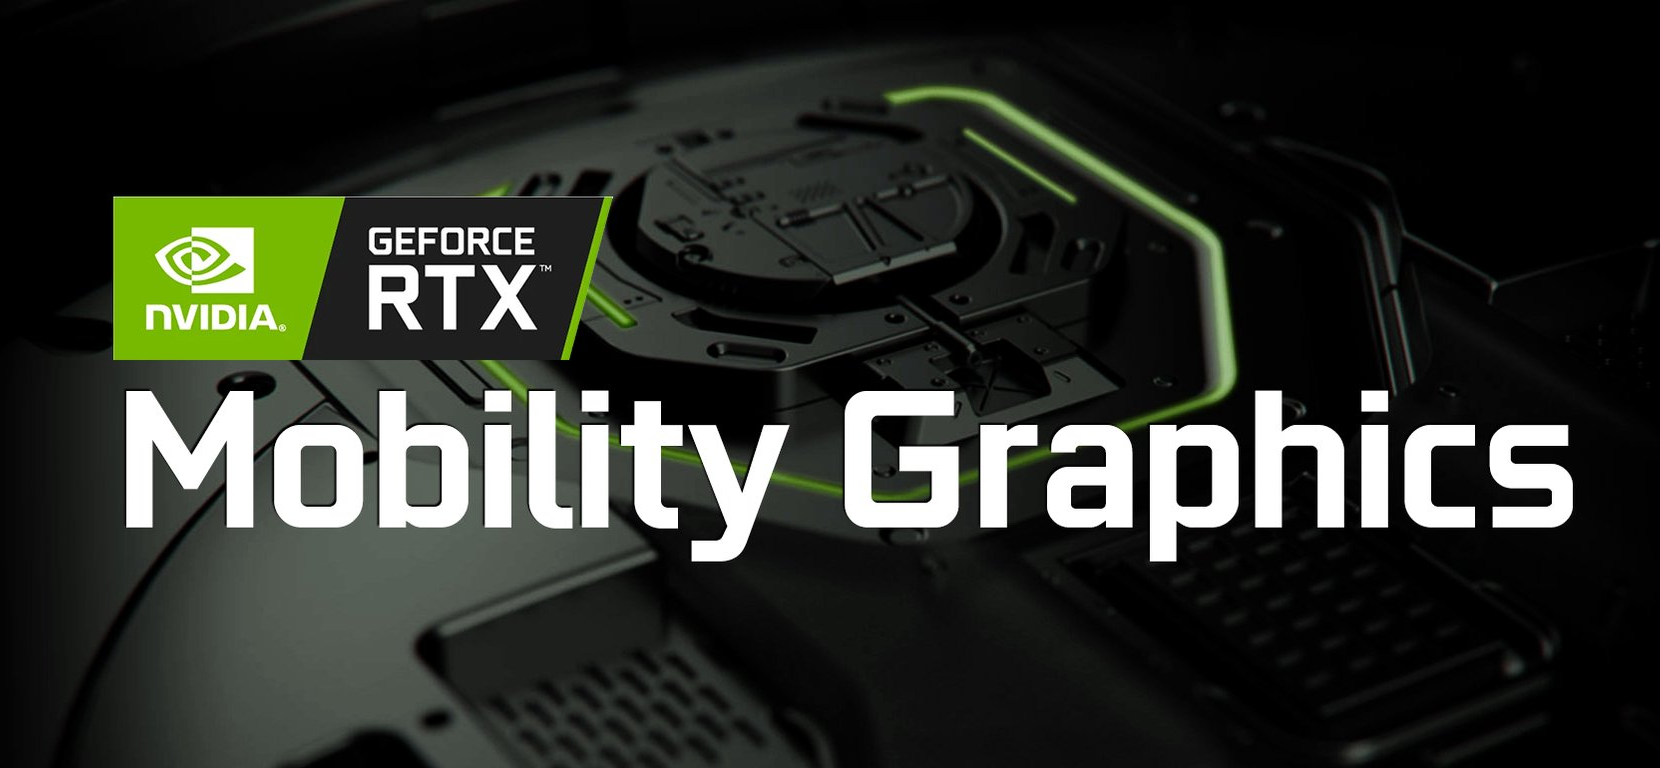 The NVIDIA GeForce RTX 3080 mobile outed with 16 GB of VRAM, a GA104 GPU and 6,144 cores - NotebookCheck.net News